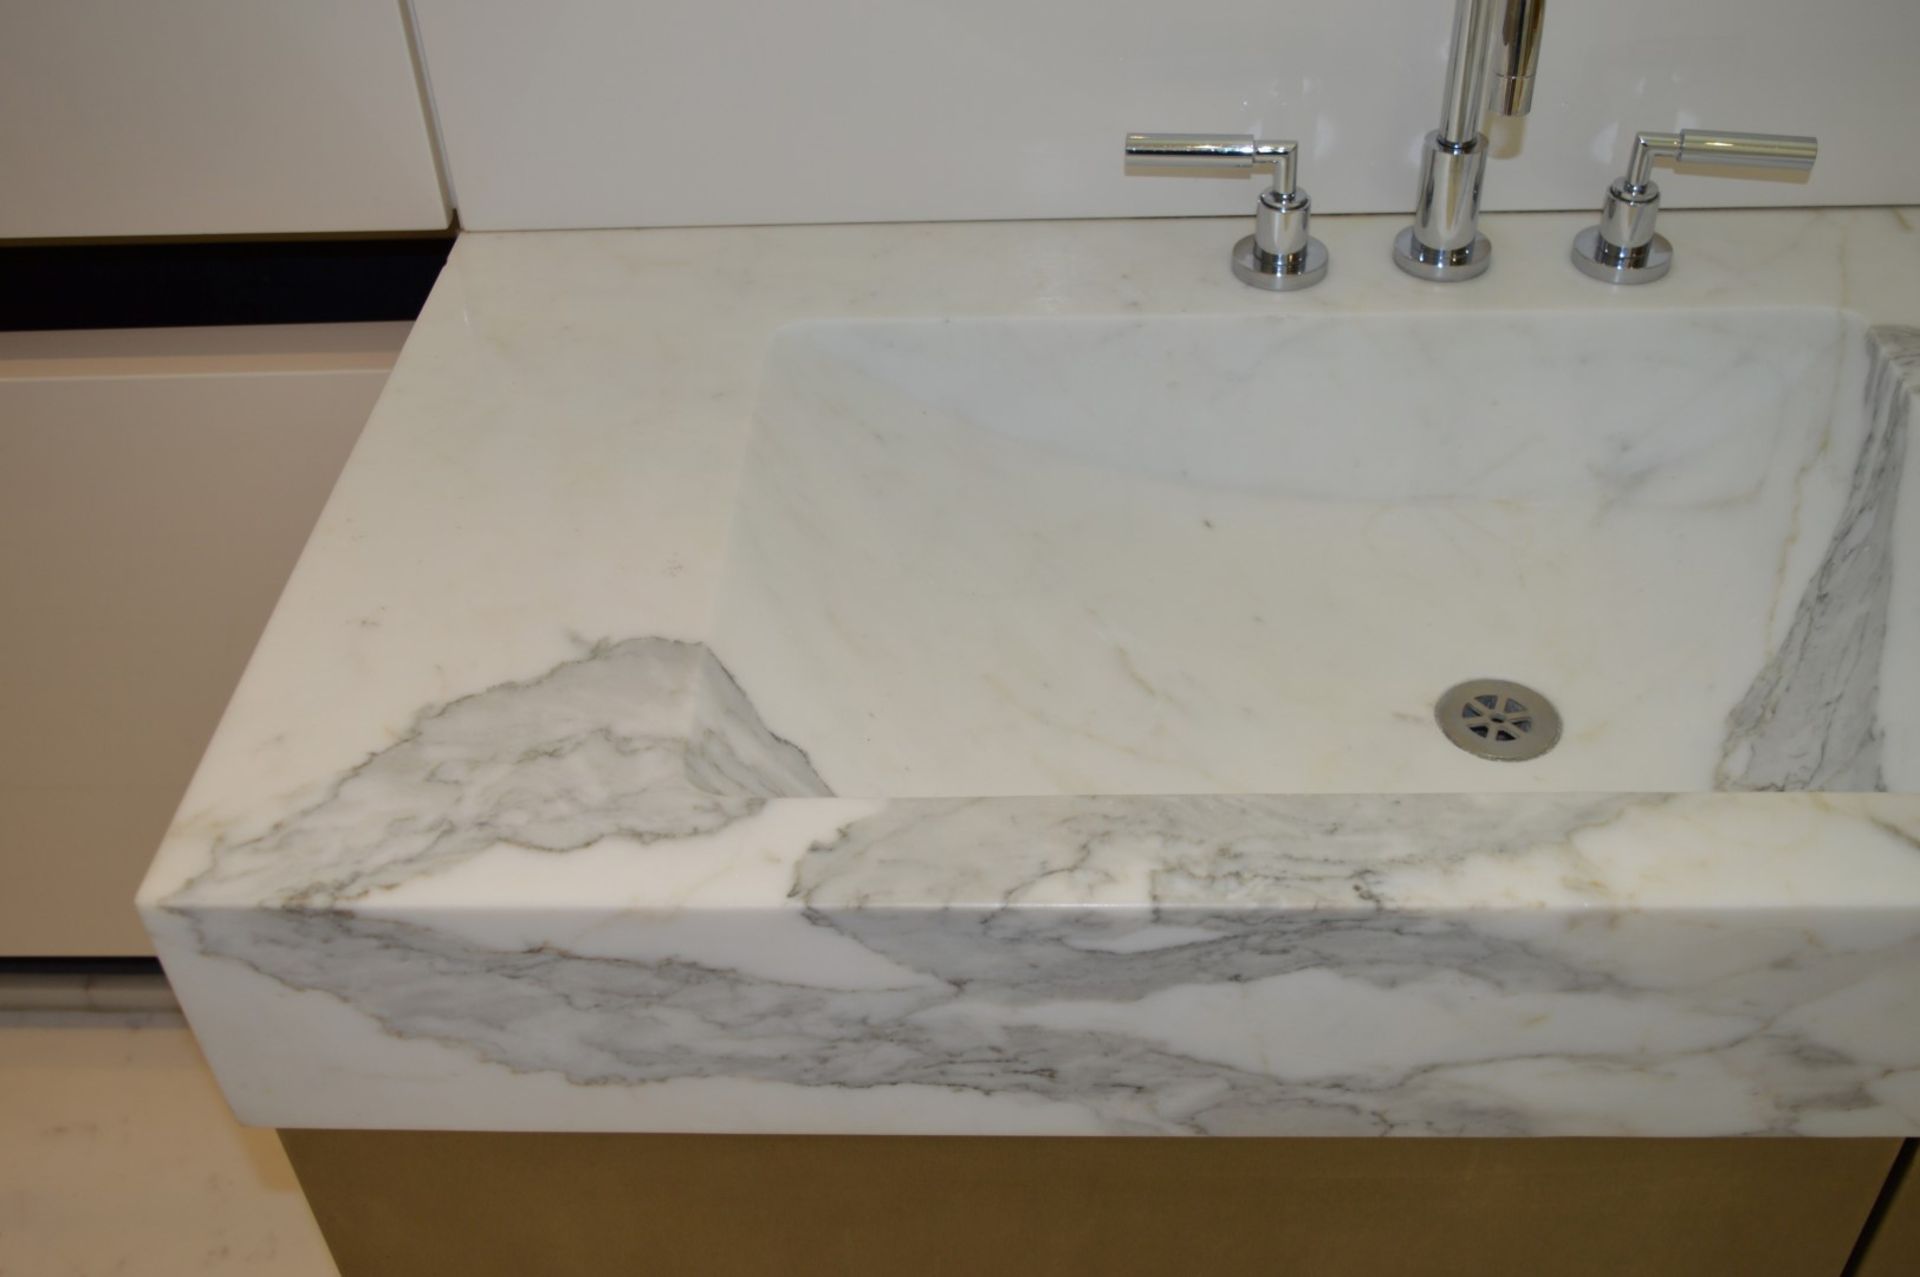 1 x Bespoke His & Hers Marble Bathroom Vanity Unit - Exquisite 7ft Twin Marble Sink Basin With Two - Image 20 of 25